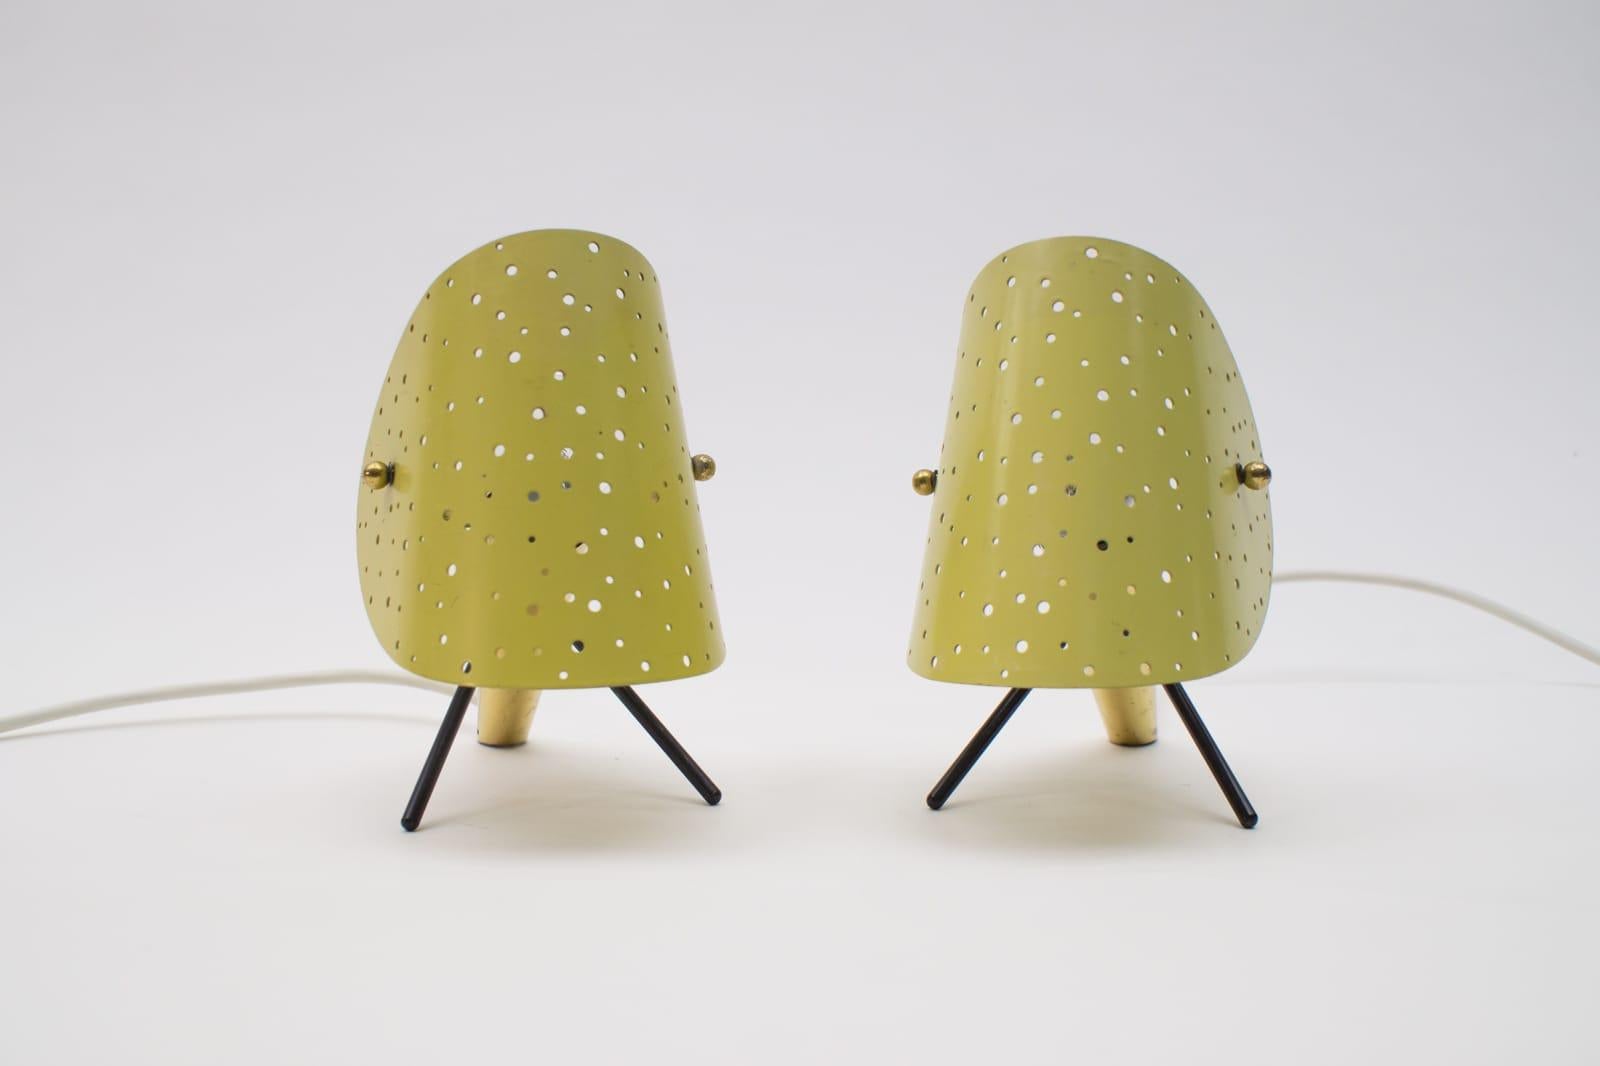 Mid-20th Century Table Lamps by Ernst Igl for Hillebrand, Set of 2, 1950s, Germany For Sale